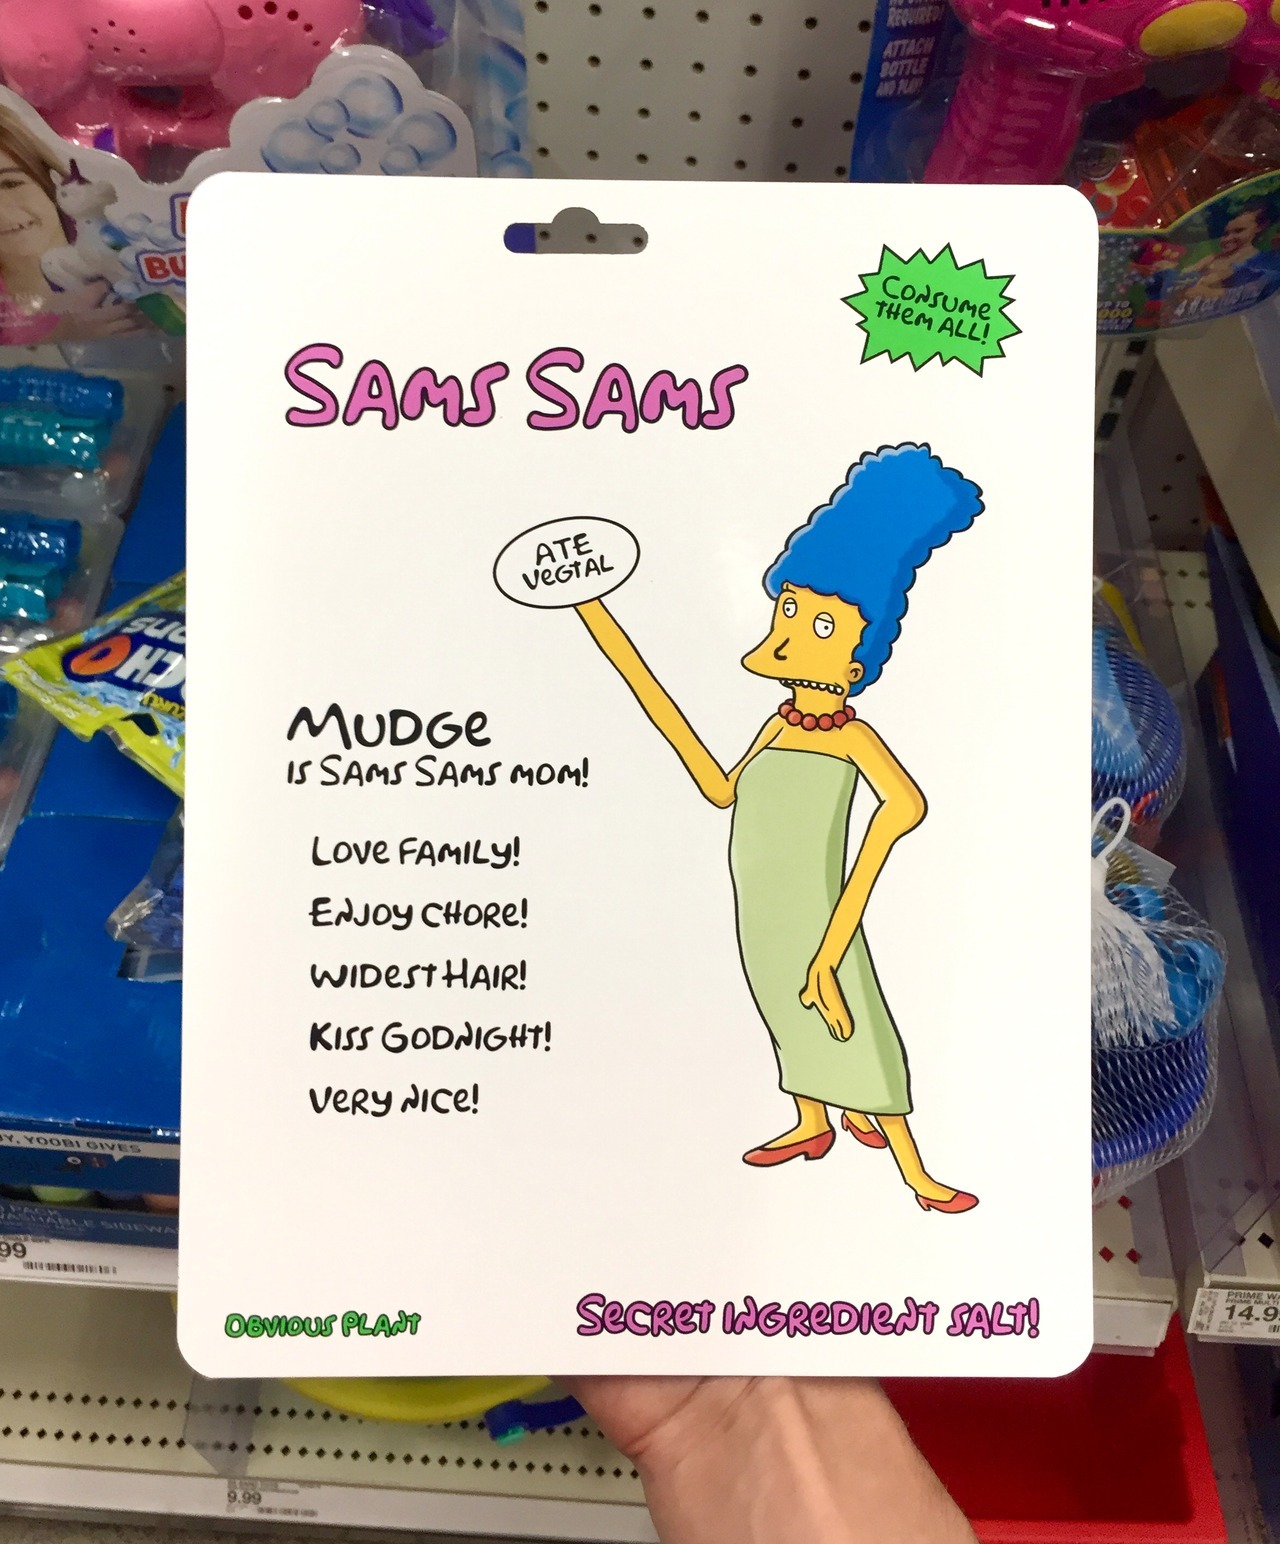 obviousplant:  Mudge is Sams Sams mom! For sale - only one available. 